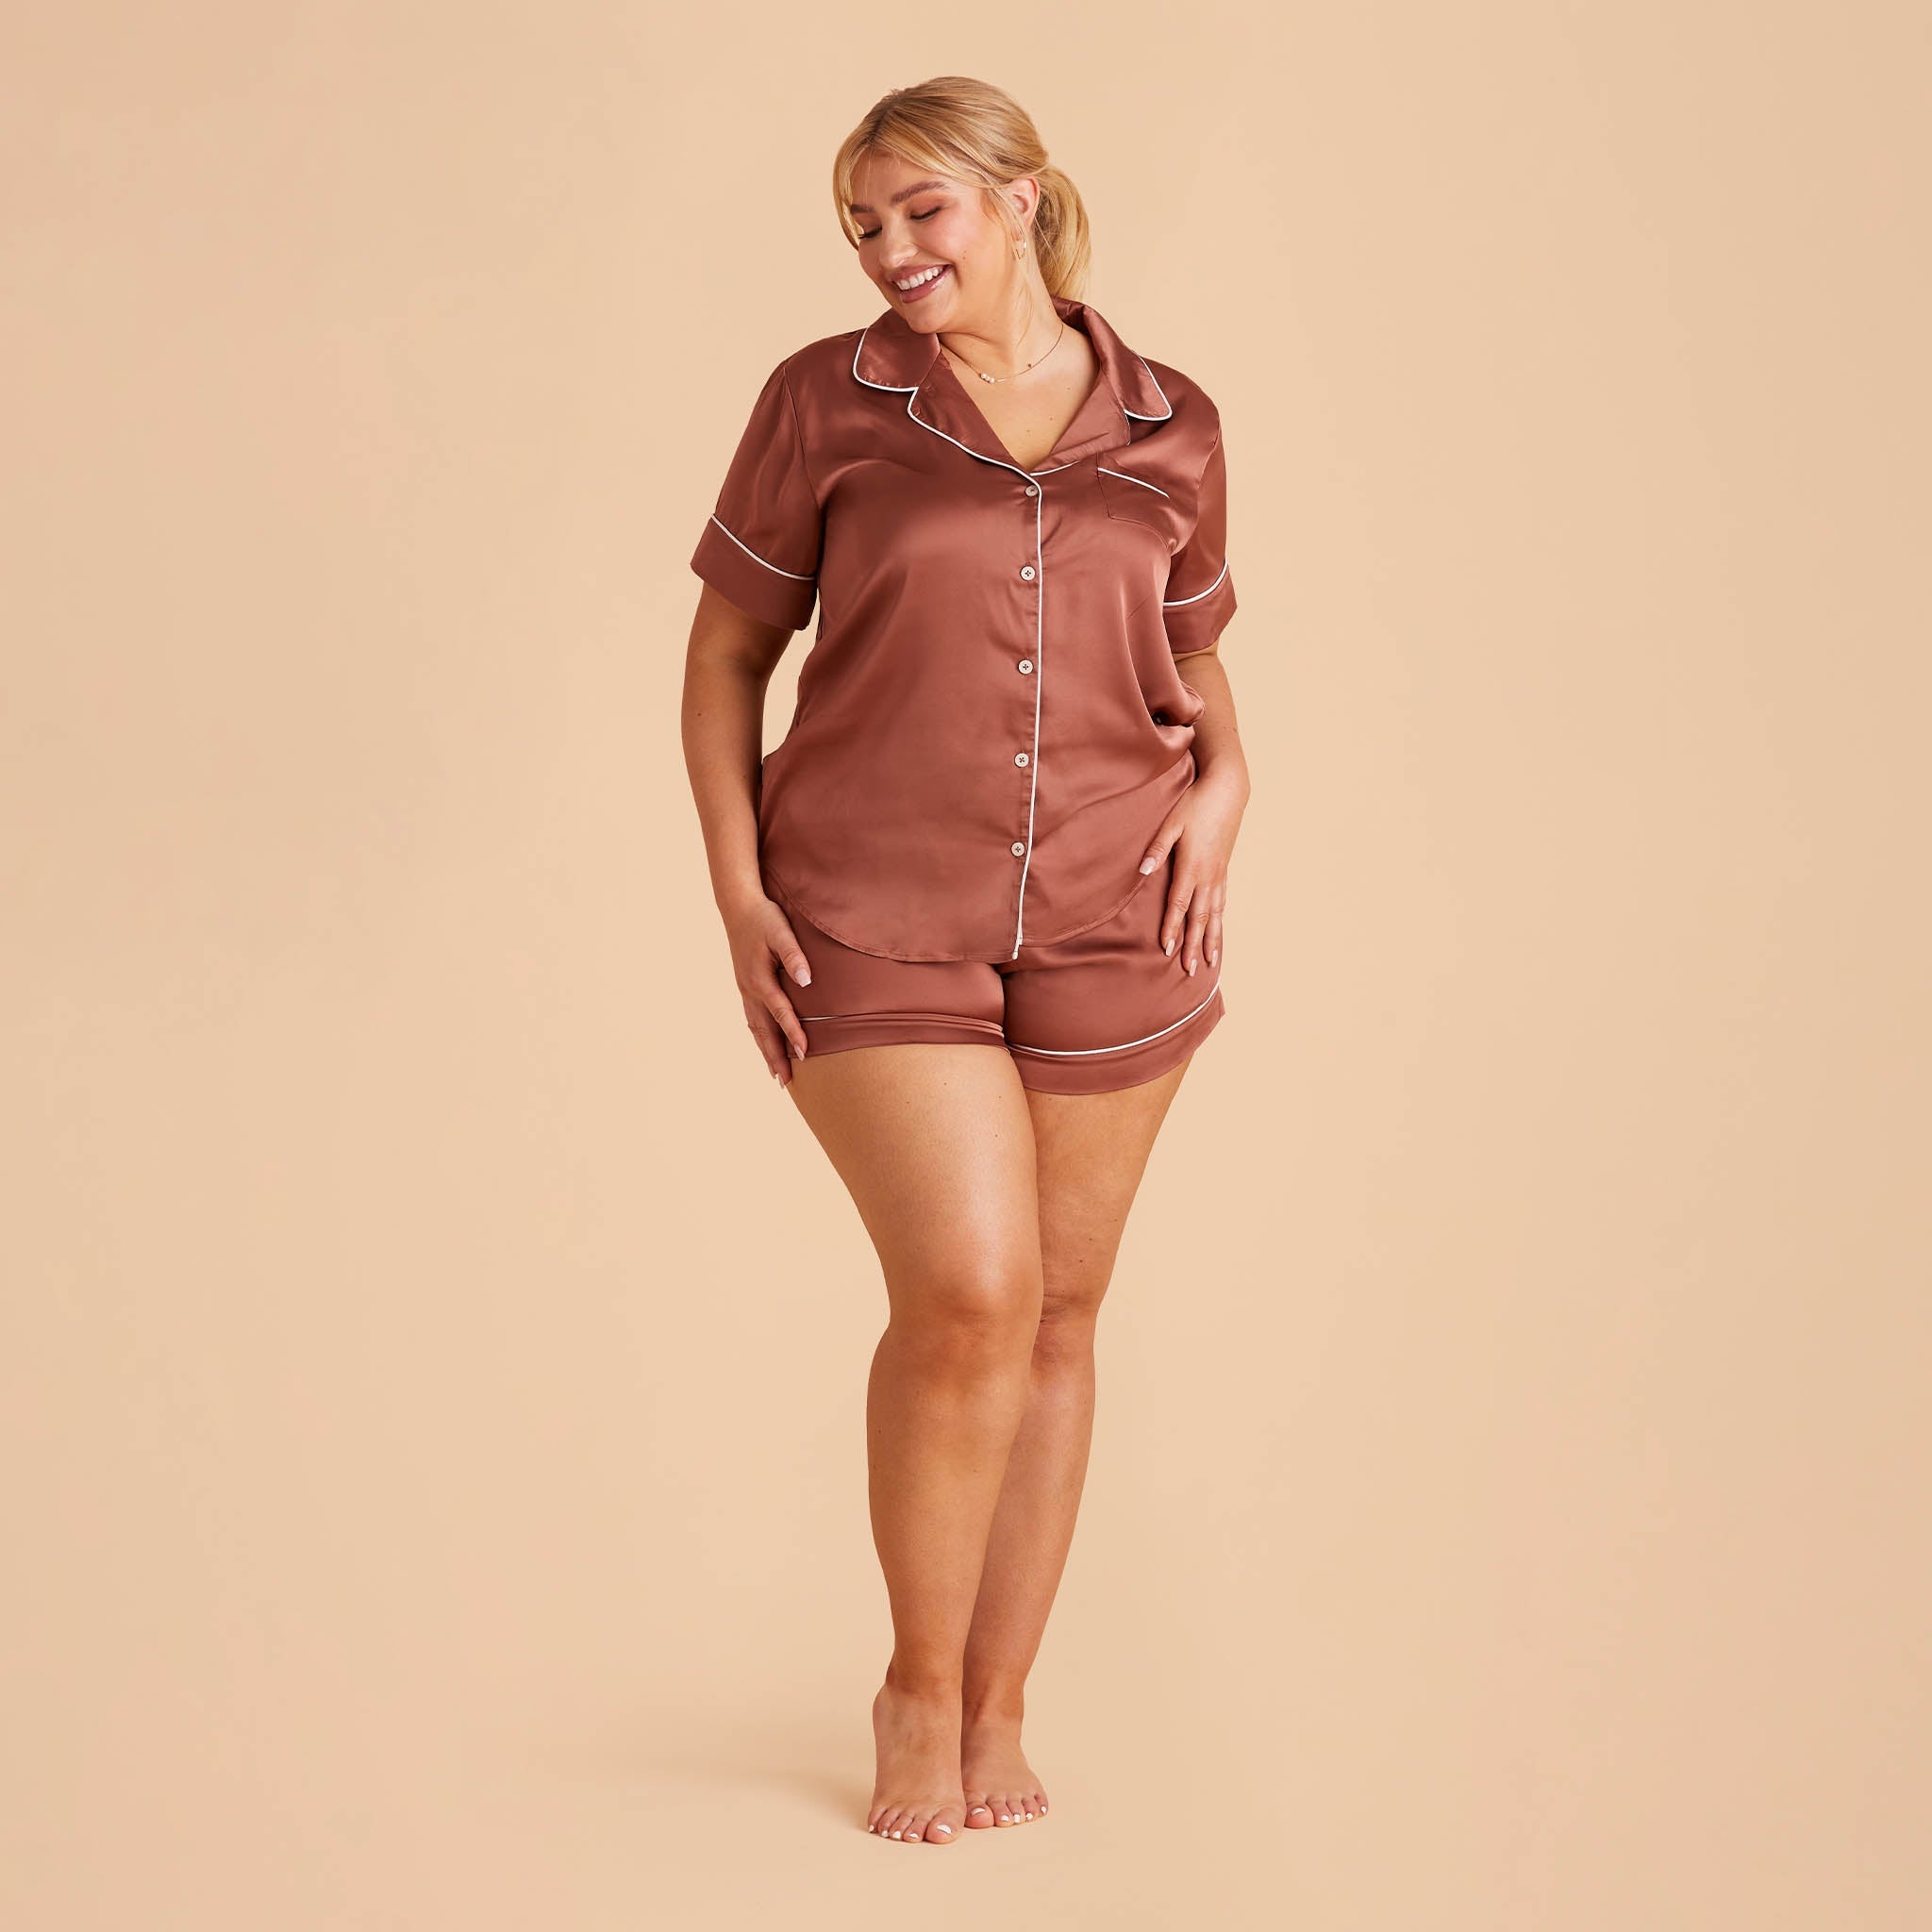 Jonny Satin Short Sleeve Bridesmaid Pajamas With White Piping in desert rose, front view